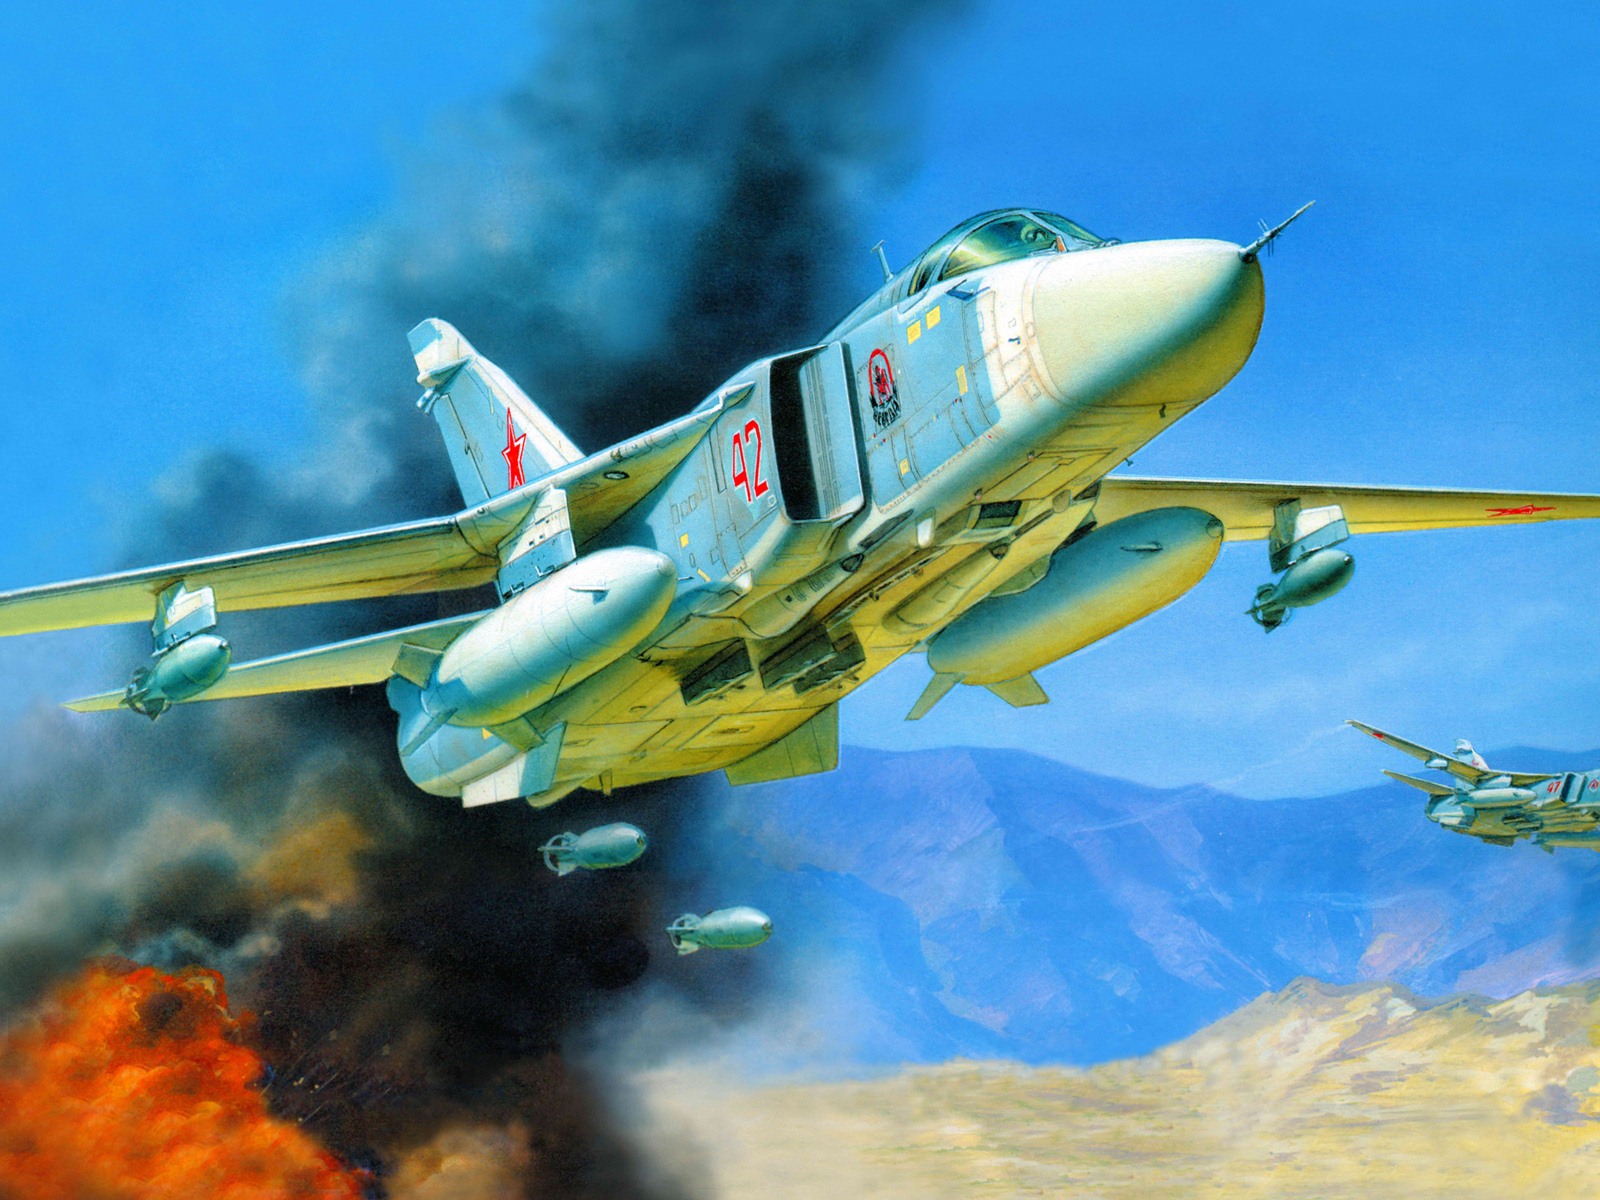 Military aircraft flight exquisite painting wallpapers #3 - 1600x1200